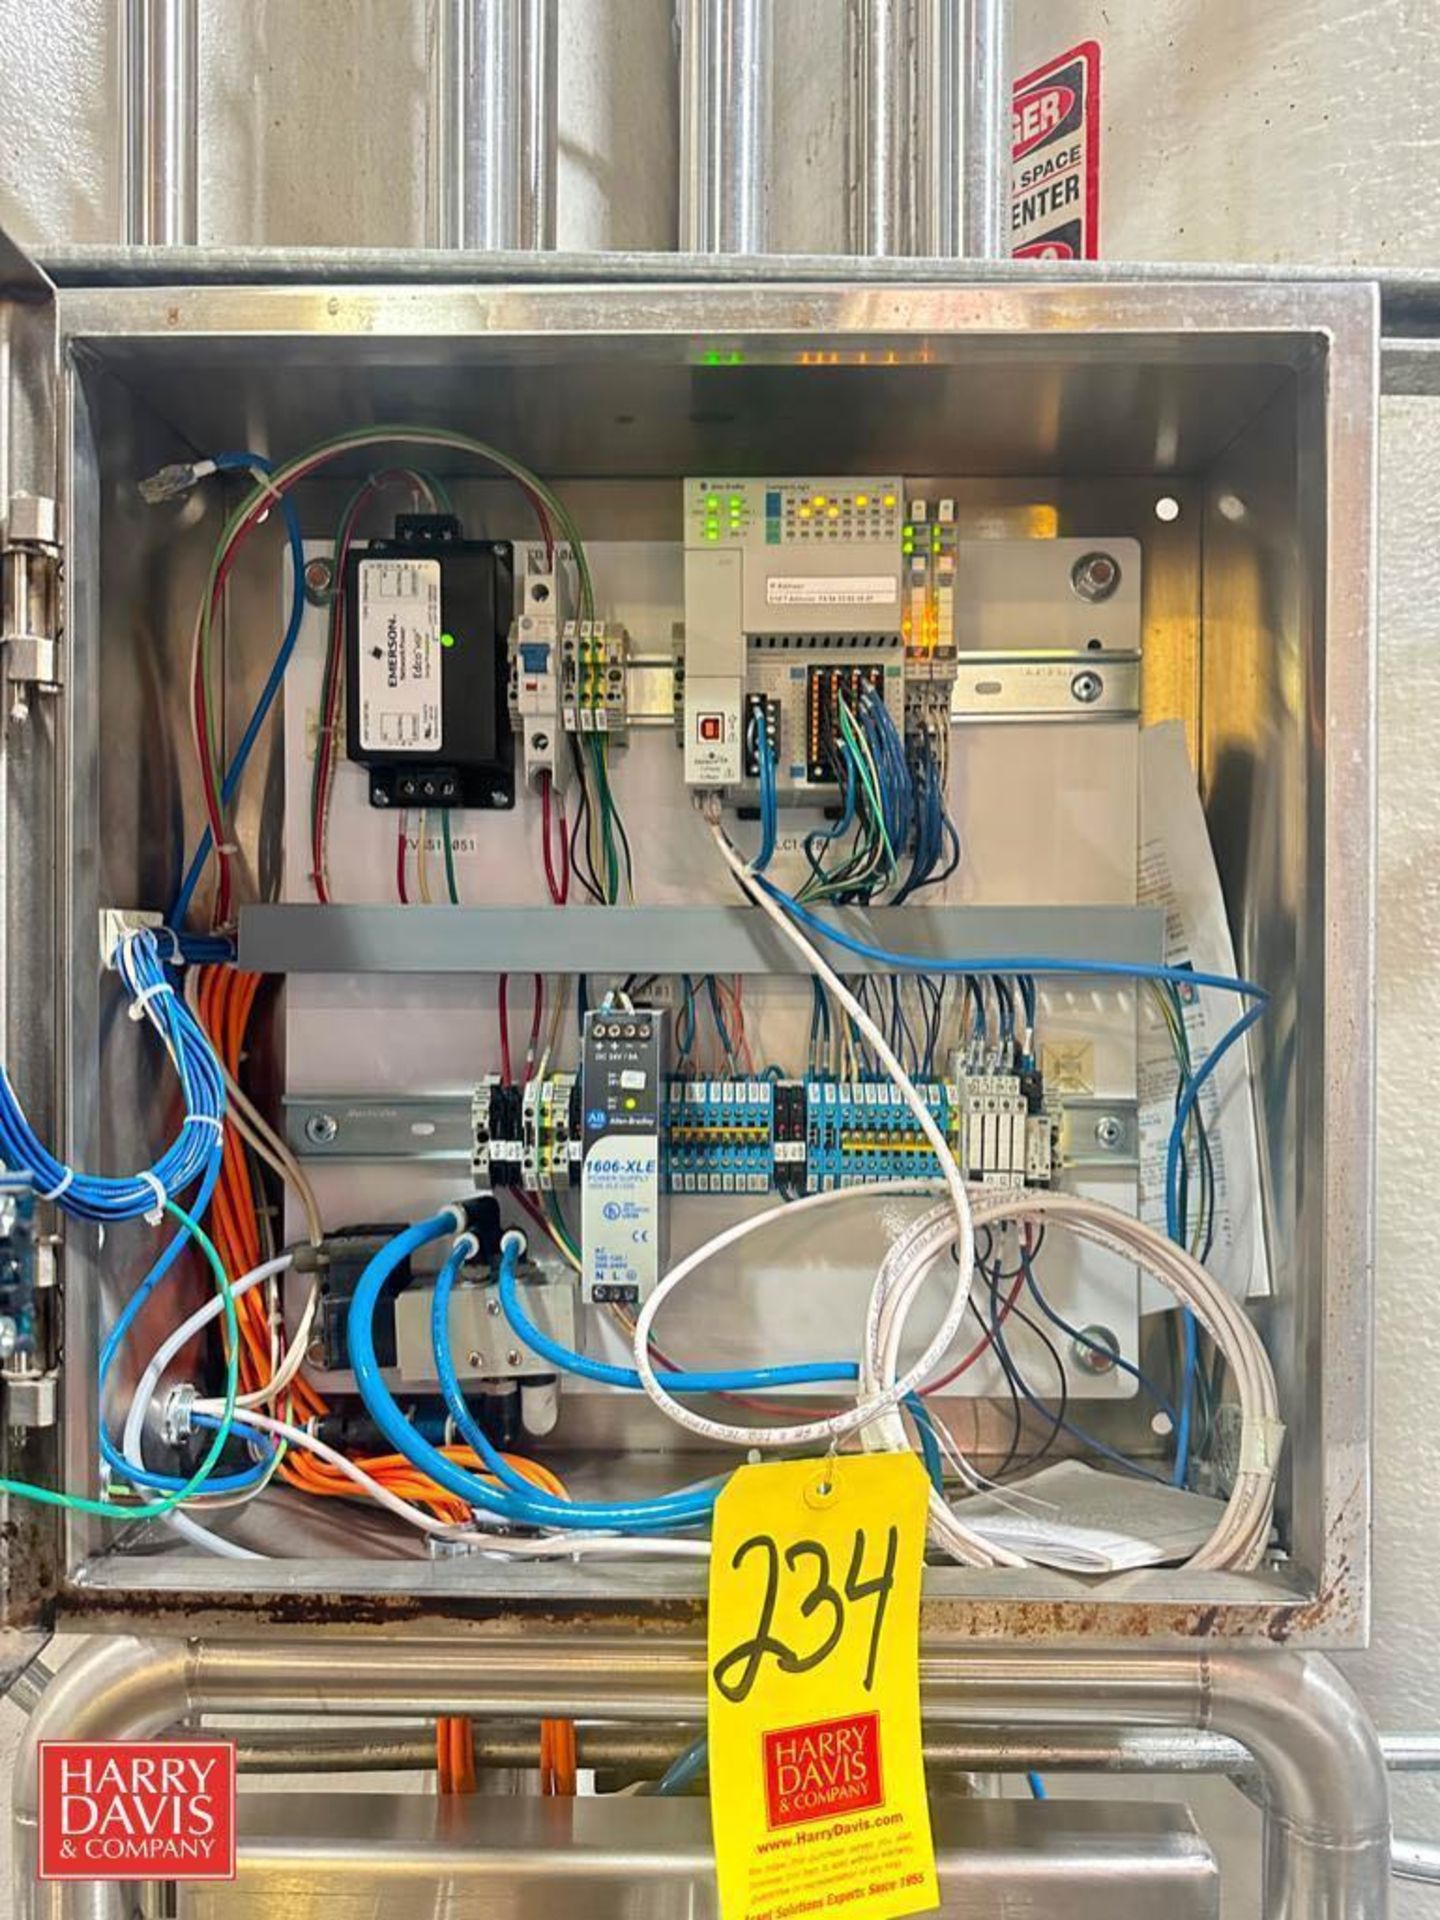 Allen-Bradley CompactLogix L16ER PLC with (2) I/Os, Switches and S/S Enclosure: Mounted on Stand